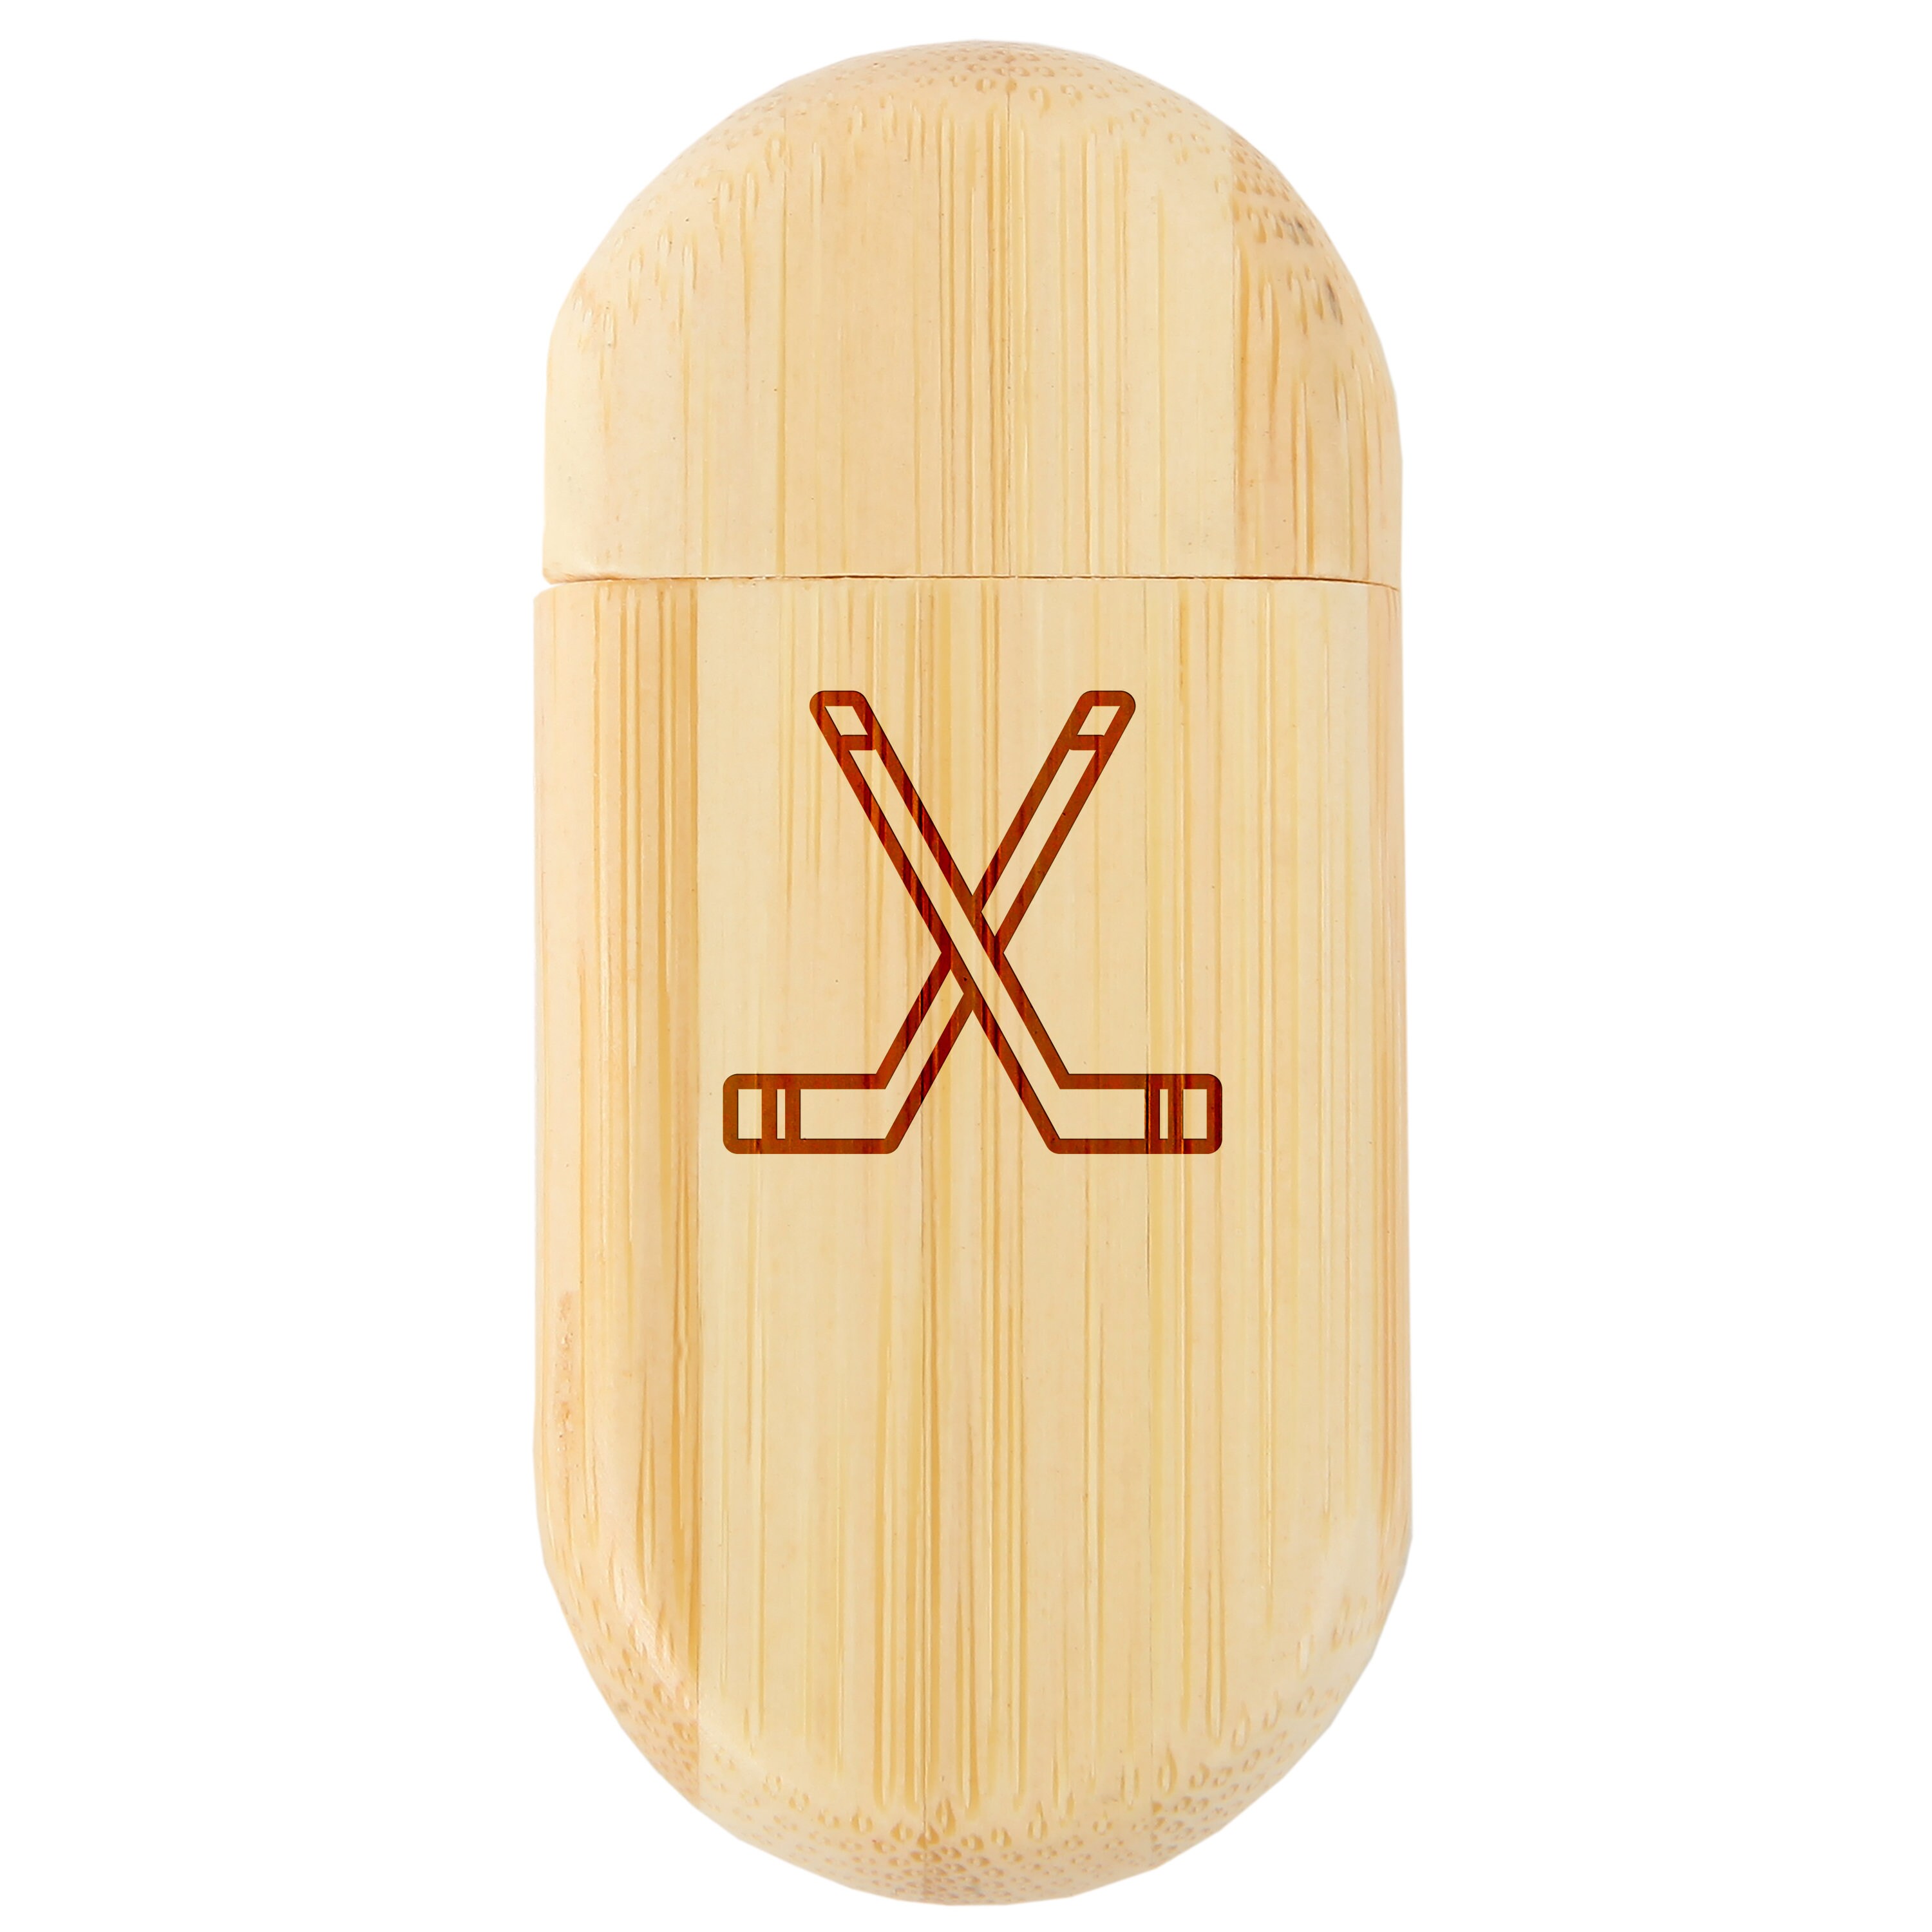 United Kingdom 8Gb Bamboo USB Flash Drive with Rounded Corners 8Gb USB Gift for All Occasions Wood Flash Drive with Laser Engraving 